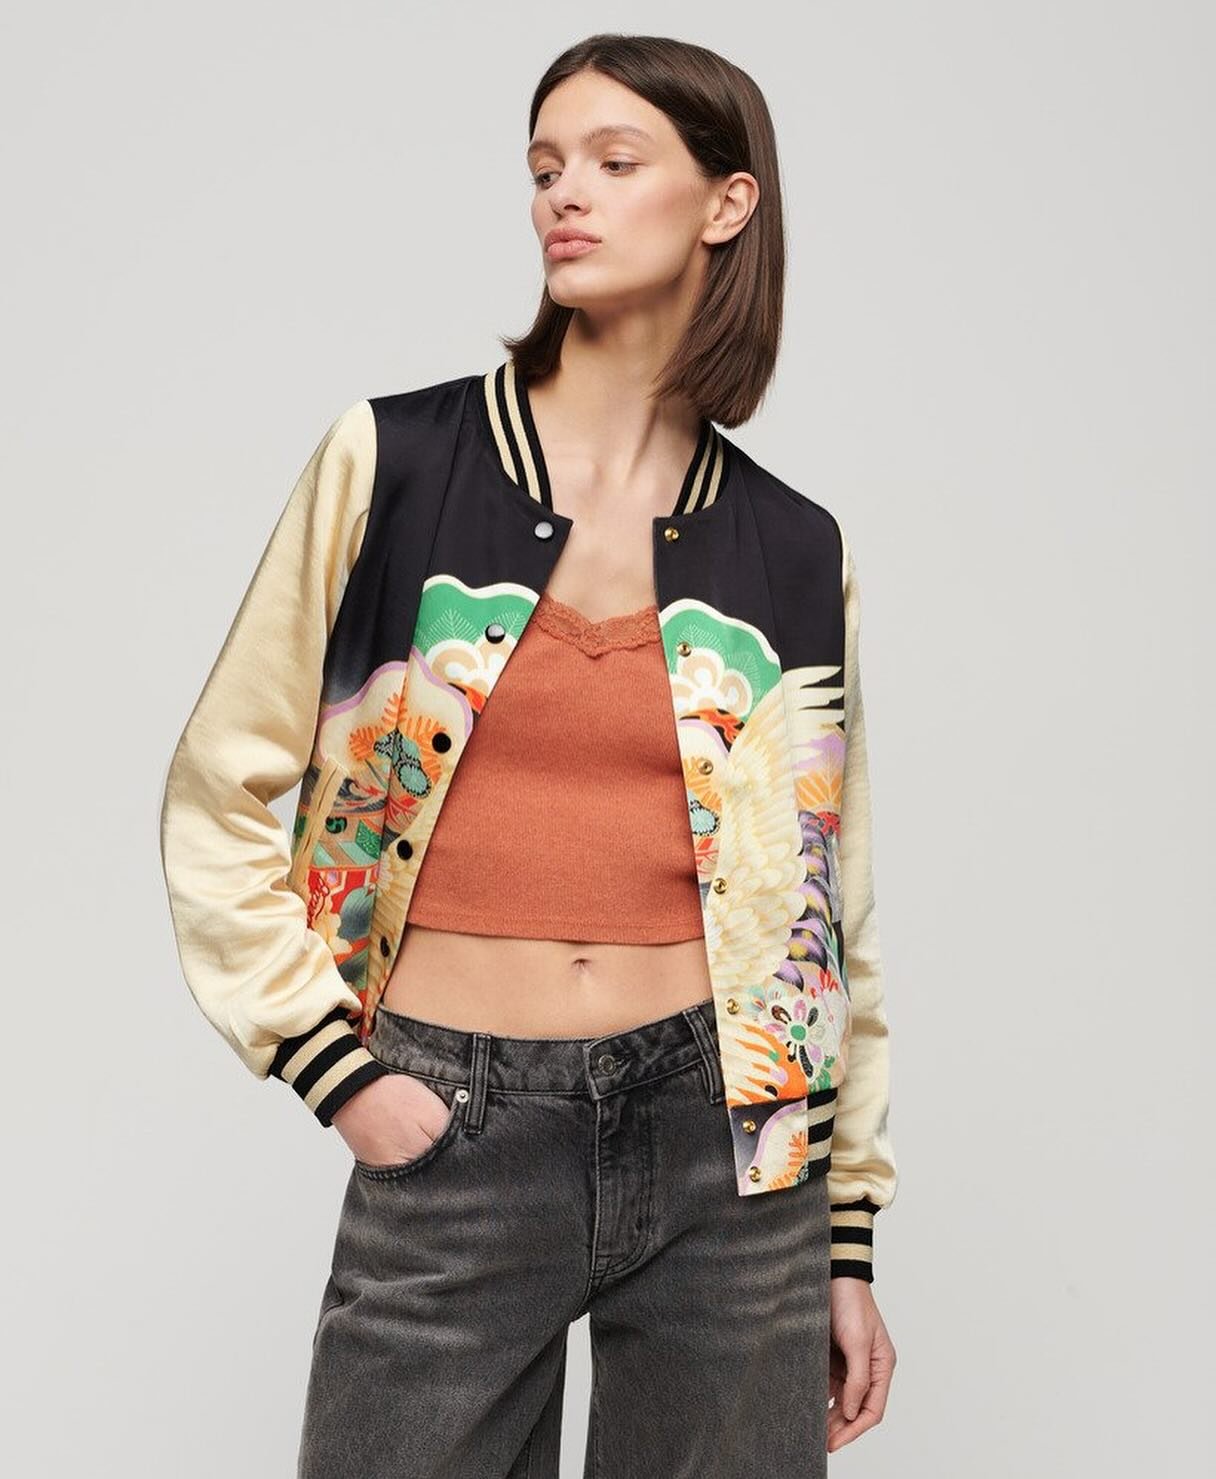 🇬🇧SUPERDRY x PAGONG🇯🇵

The new collection has launched!
Check out the super cool collab items @superdry 

Suikajan Printed Bomber Jacket
Bring a ray of Japanese inspiration to your wardrobe with the Suikajan Printed Bomber Jacket. The bomber jack